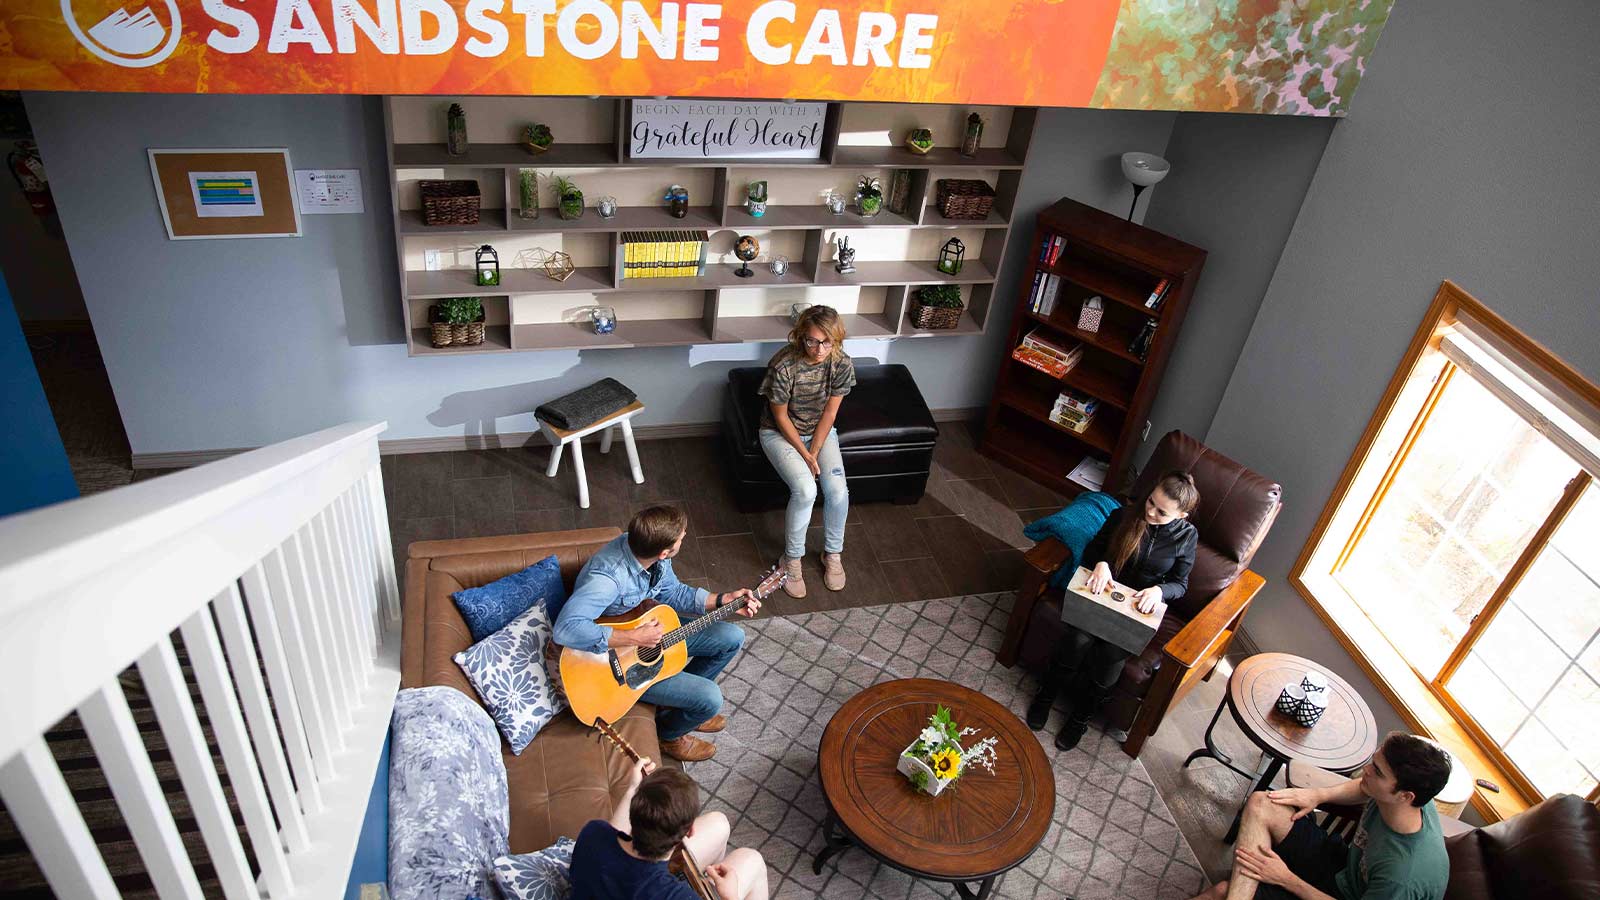 An aerial view of a cozy lounge area with people conversing, featuring mural wall with the text "Sandstone Care."